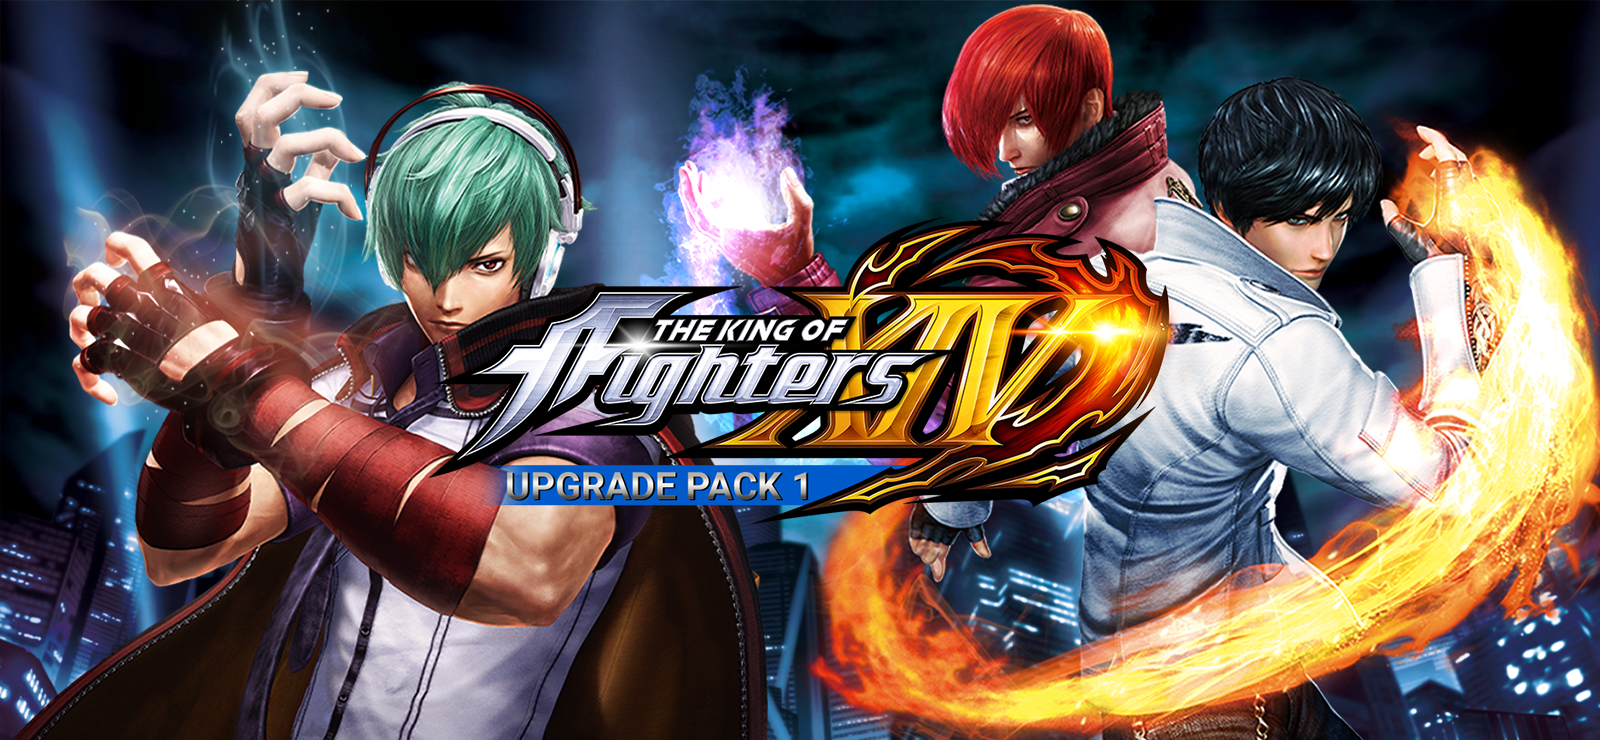 THE KING OF FIGHTERS XIV GALAXY EDITION UPGRADE PACK 1